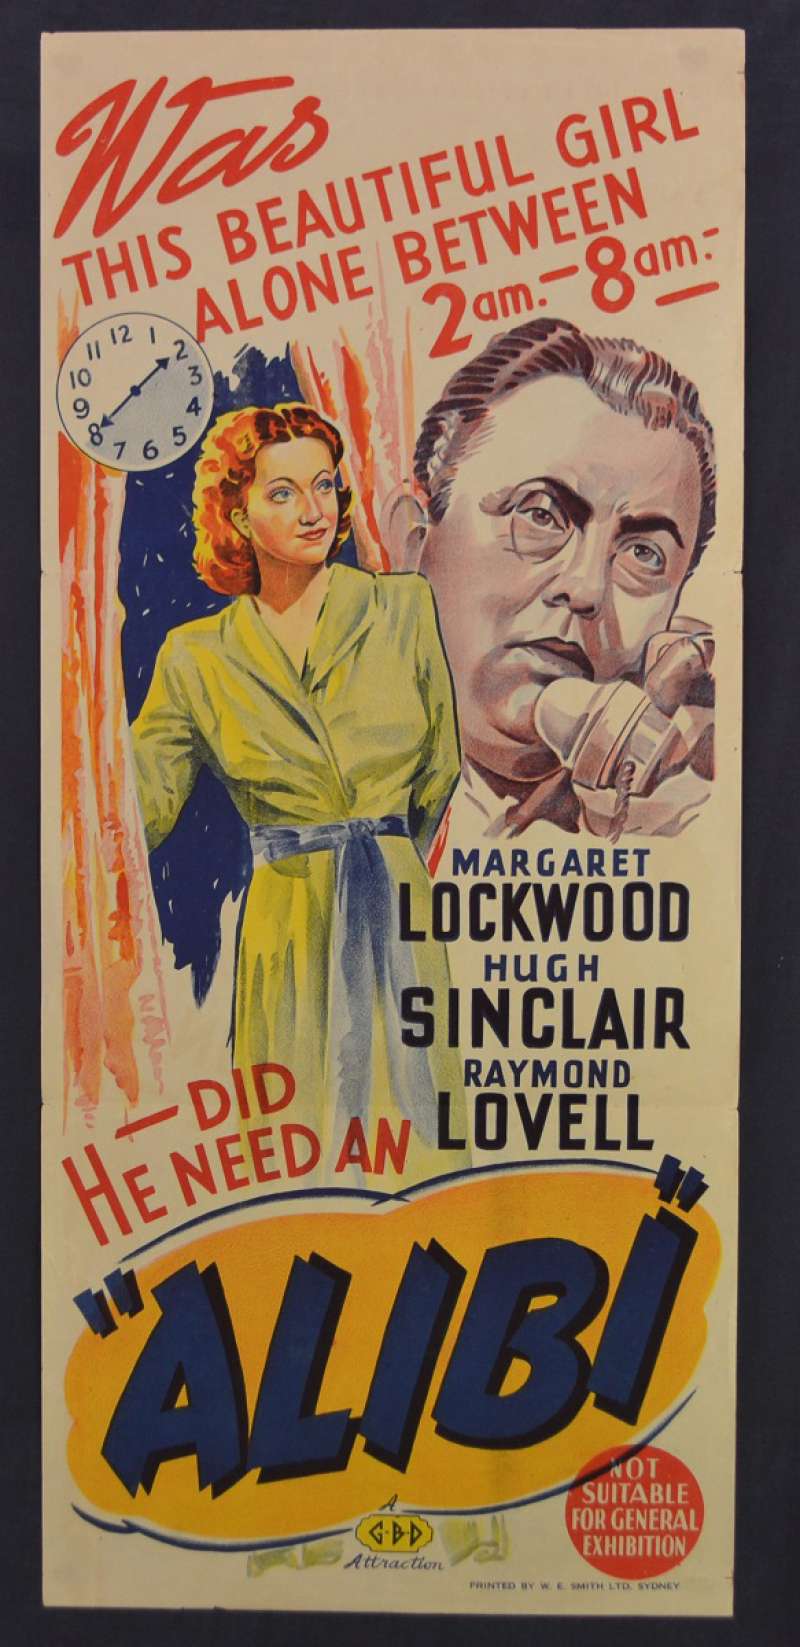 All About Movies Alibi Movie Poster Original Daybill 1942 Margaret - click for supersize image